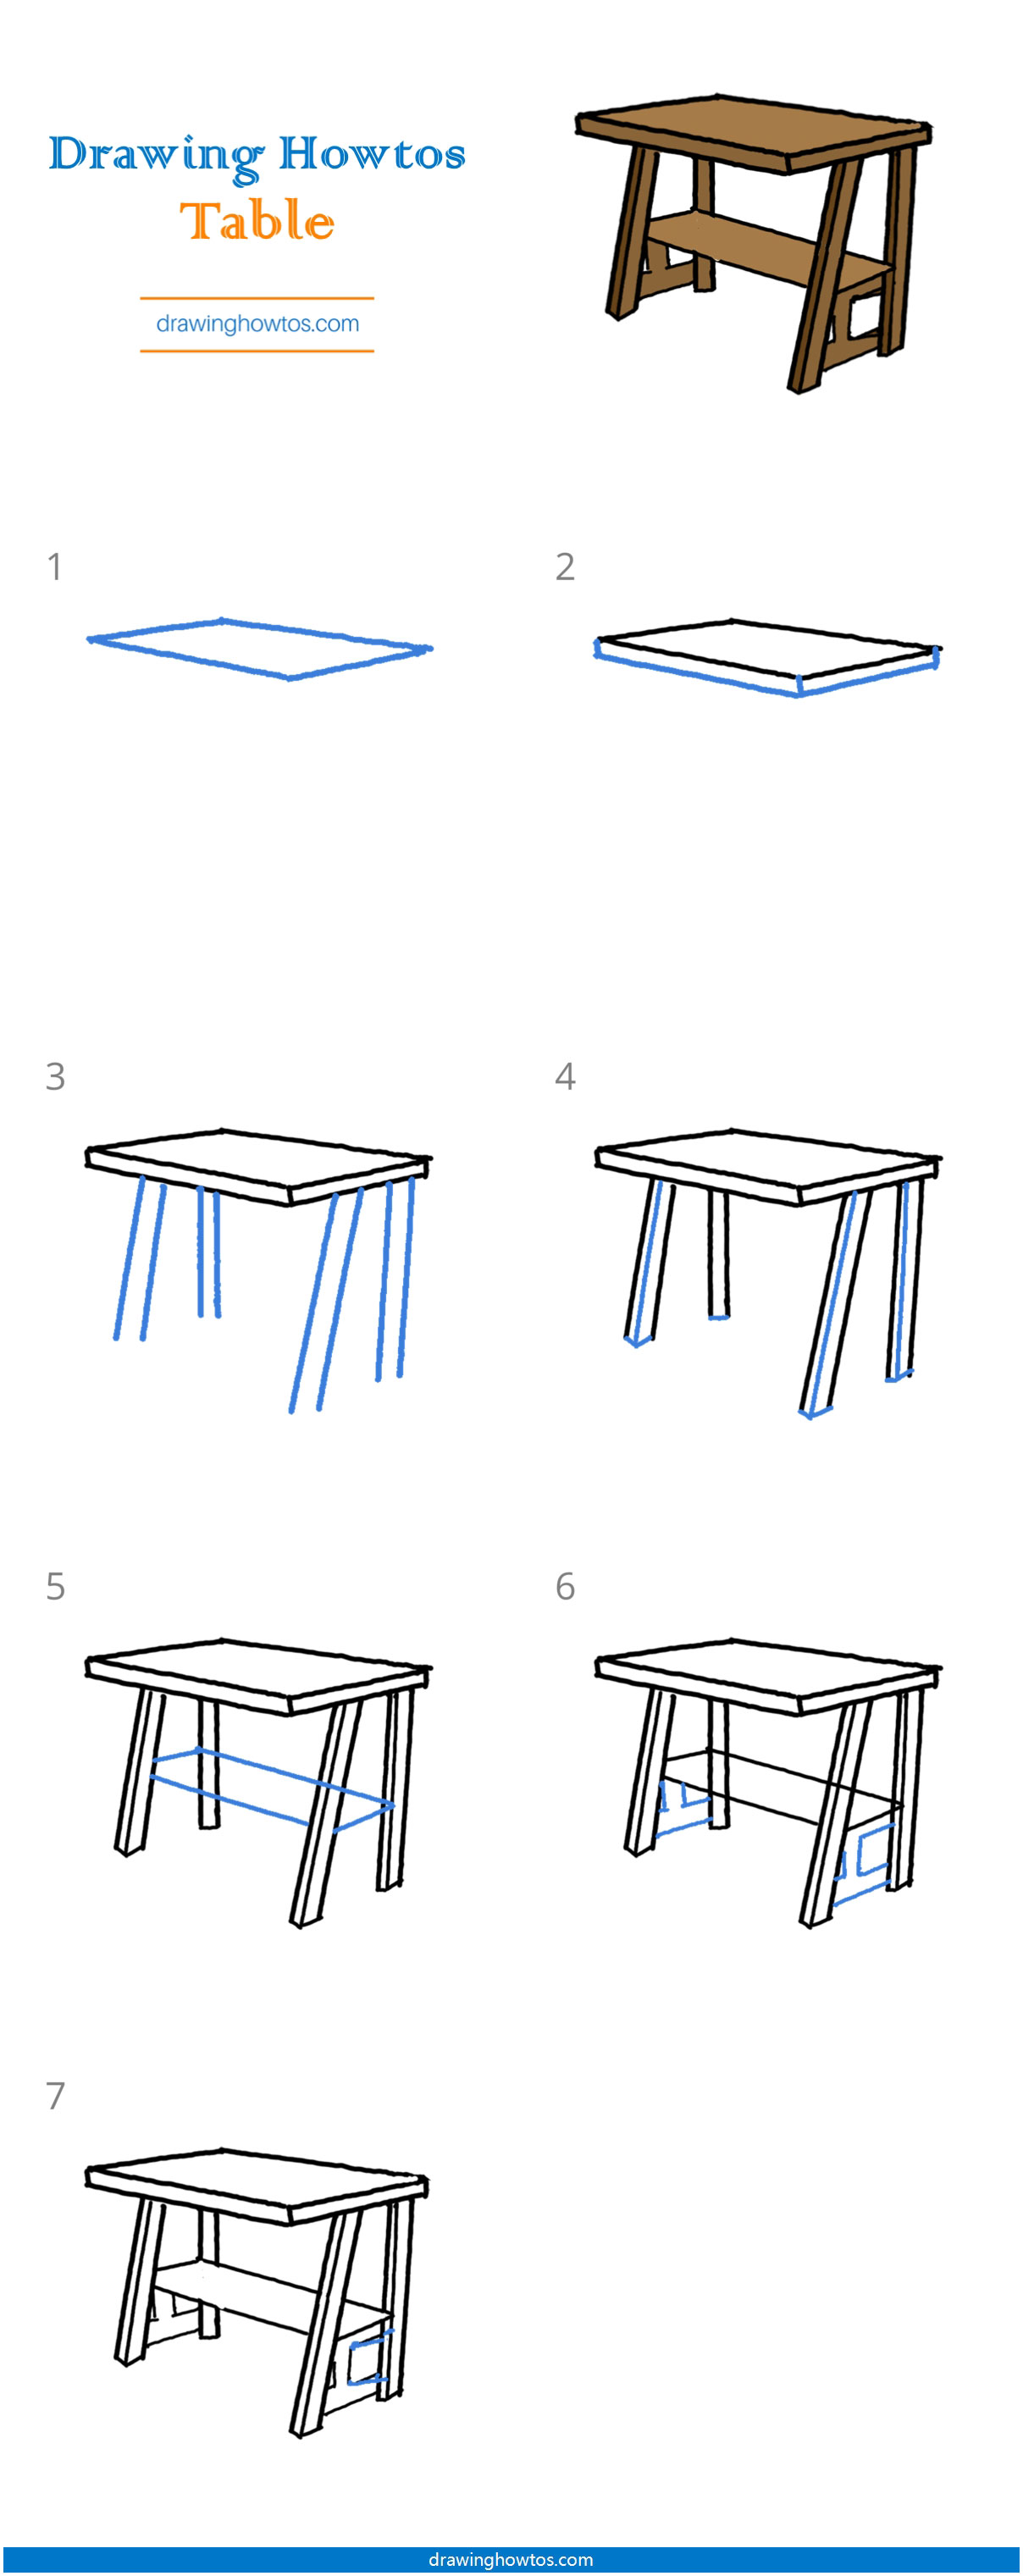 How to Draw a Table Step by Step